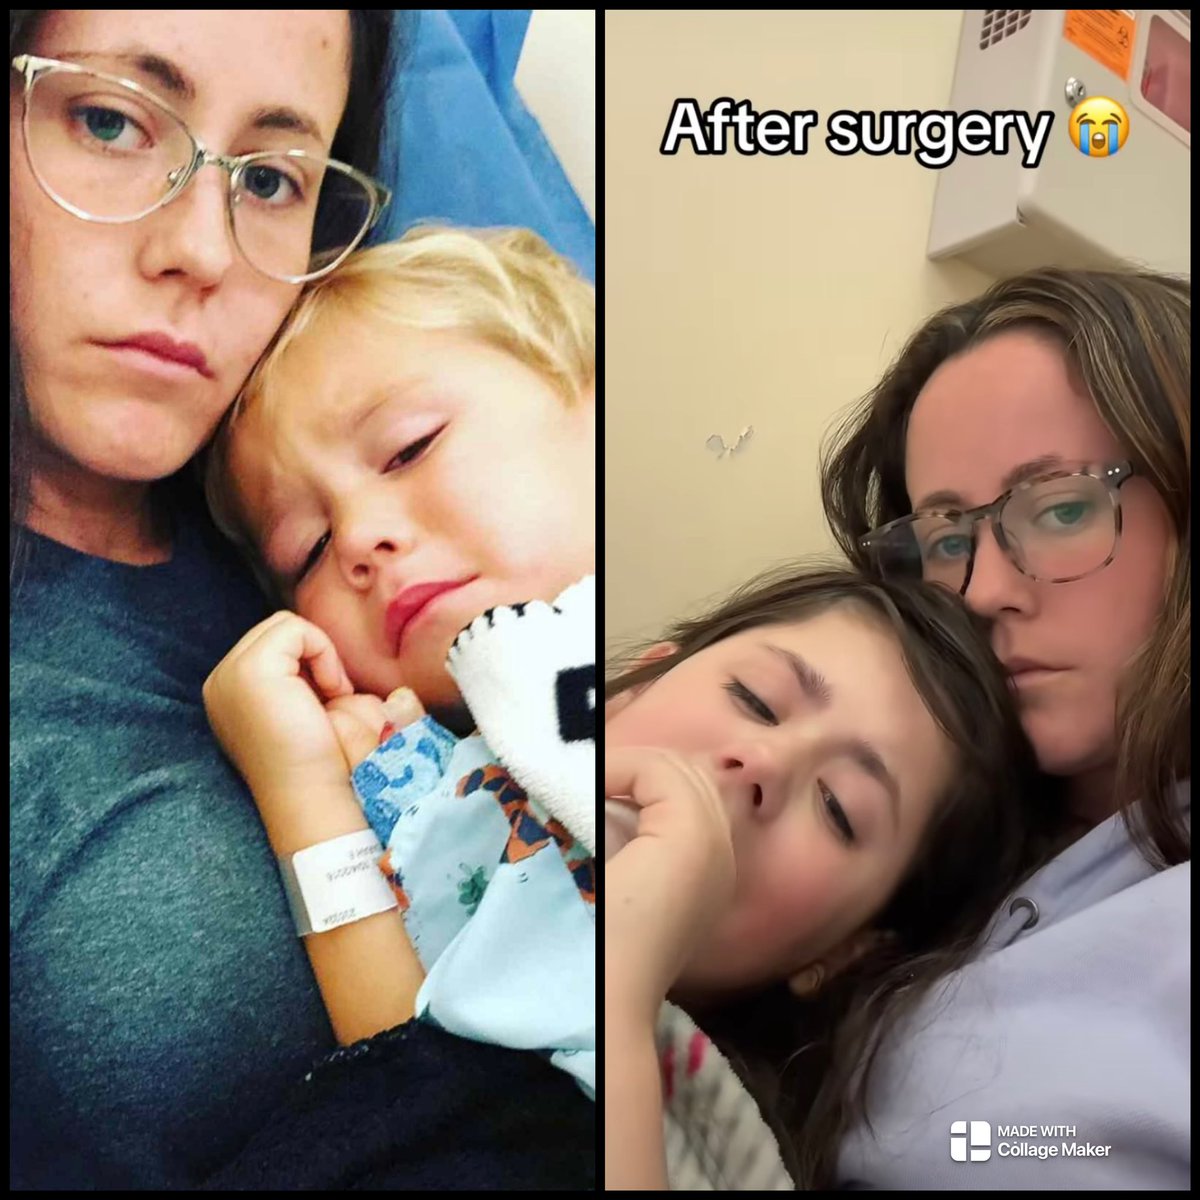 When your kid gets surgery follow Jenelle’s lead and shove a camera in their face so everyone can see how good of a mom you are. #NarcissisticParenting101 #ShowMommyYourSadFace